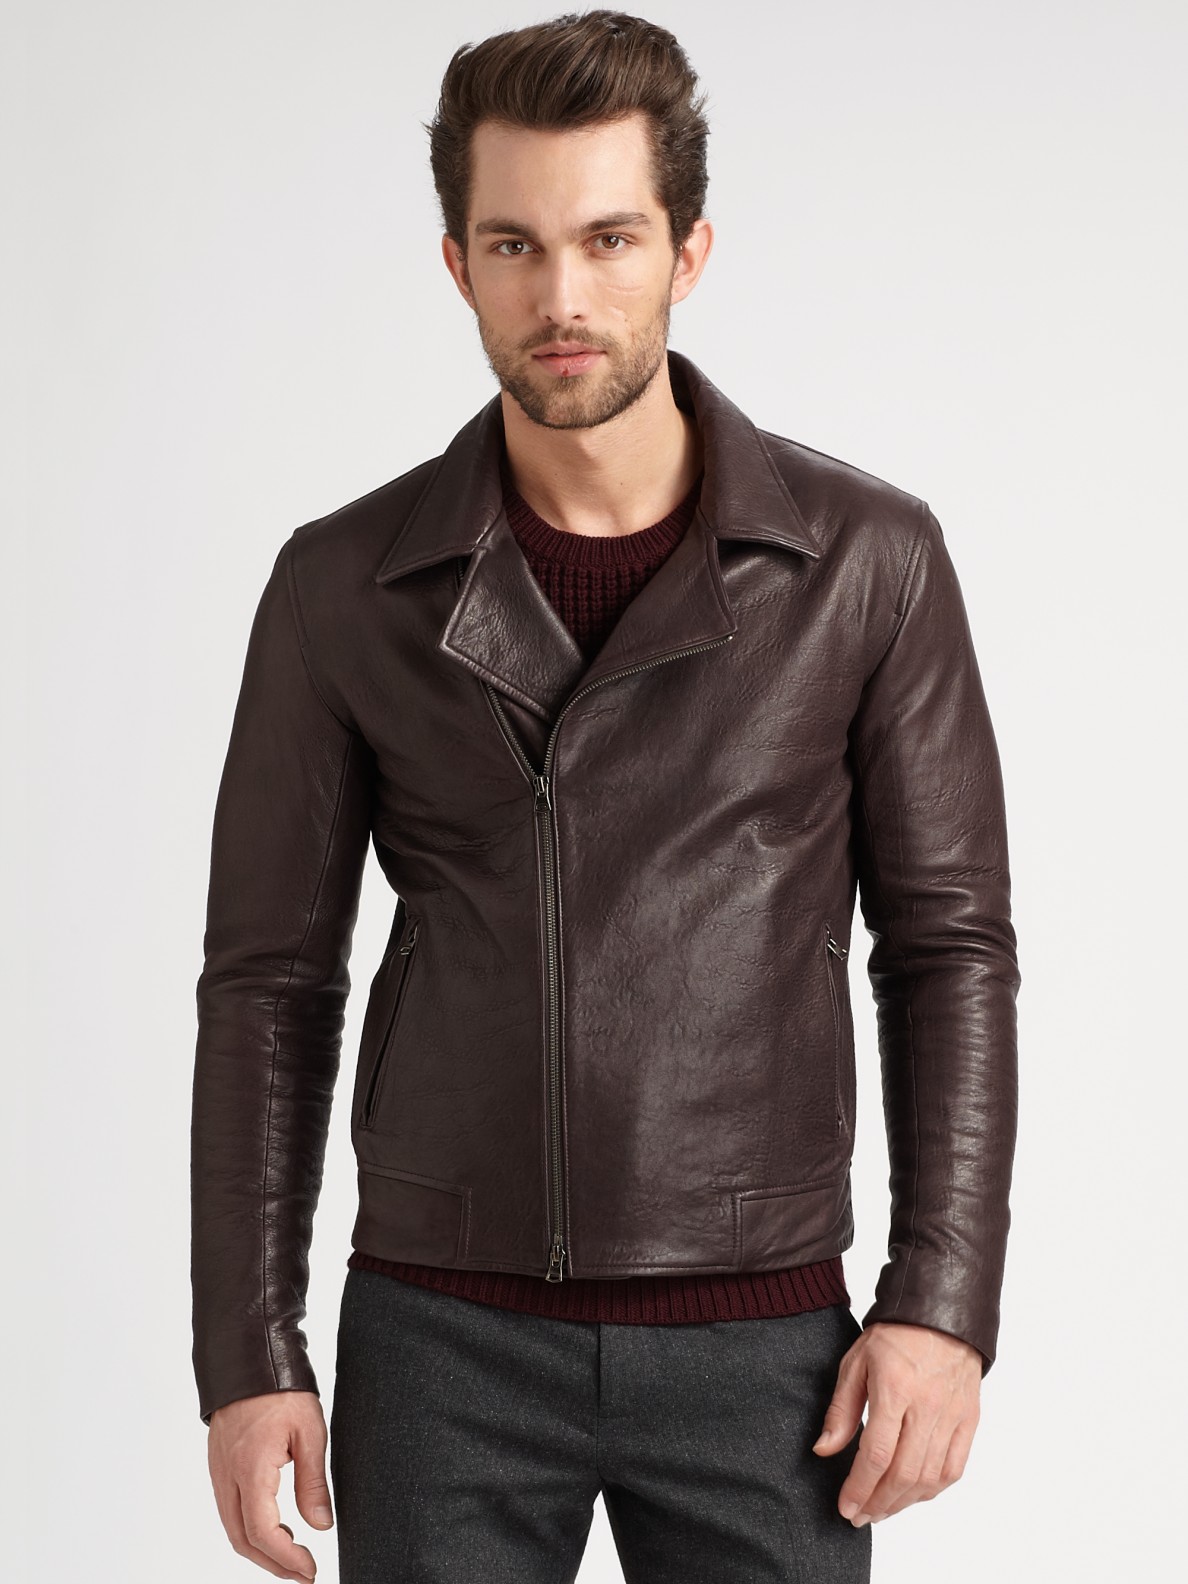 Theory Lambskin Leather Jacket in Brown for Men - Lyst